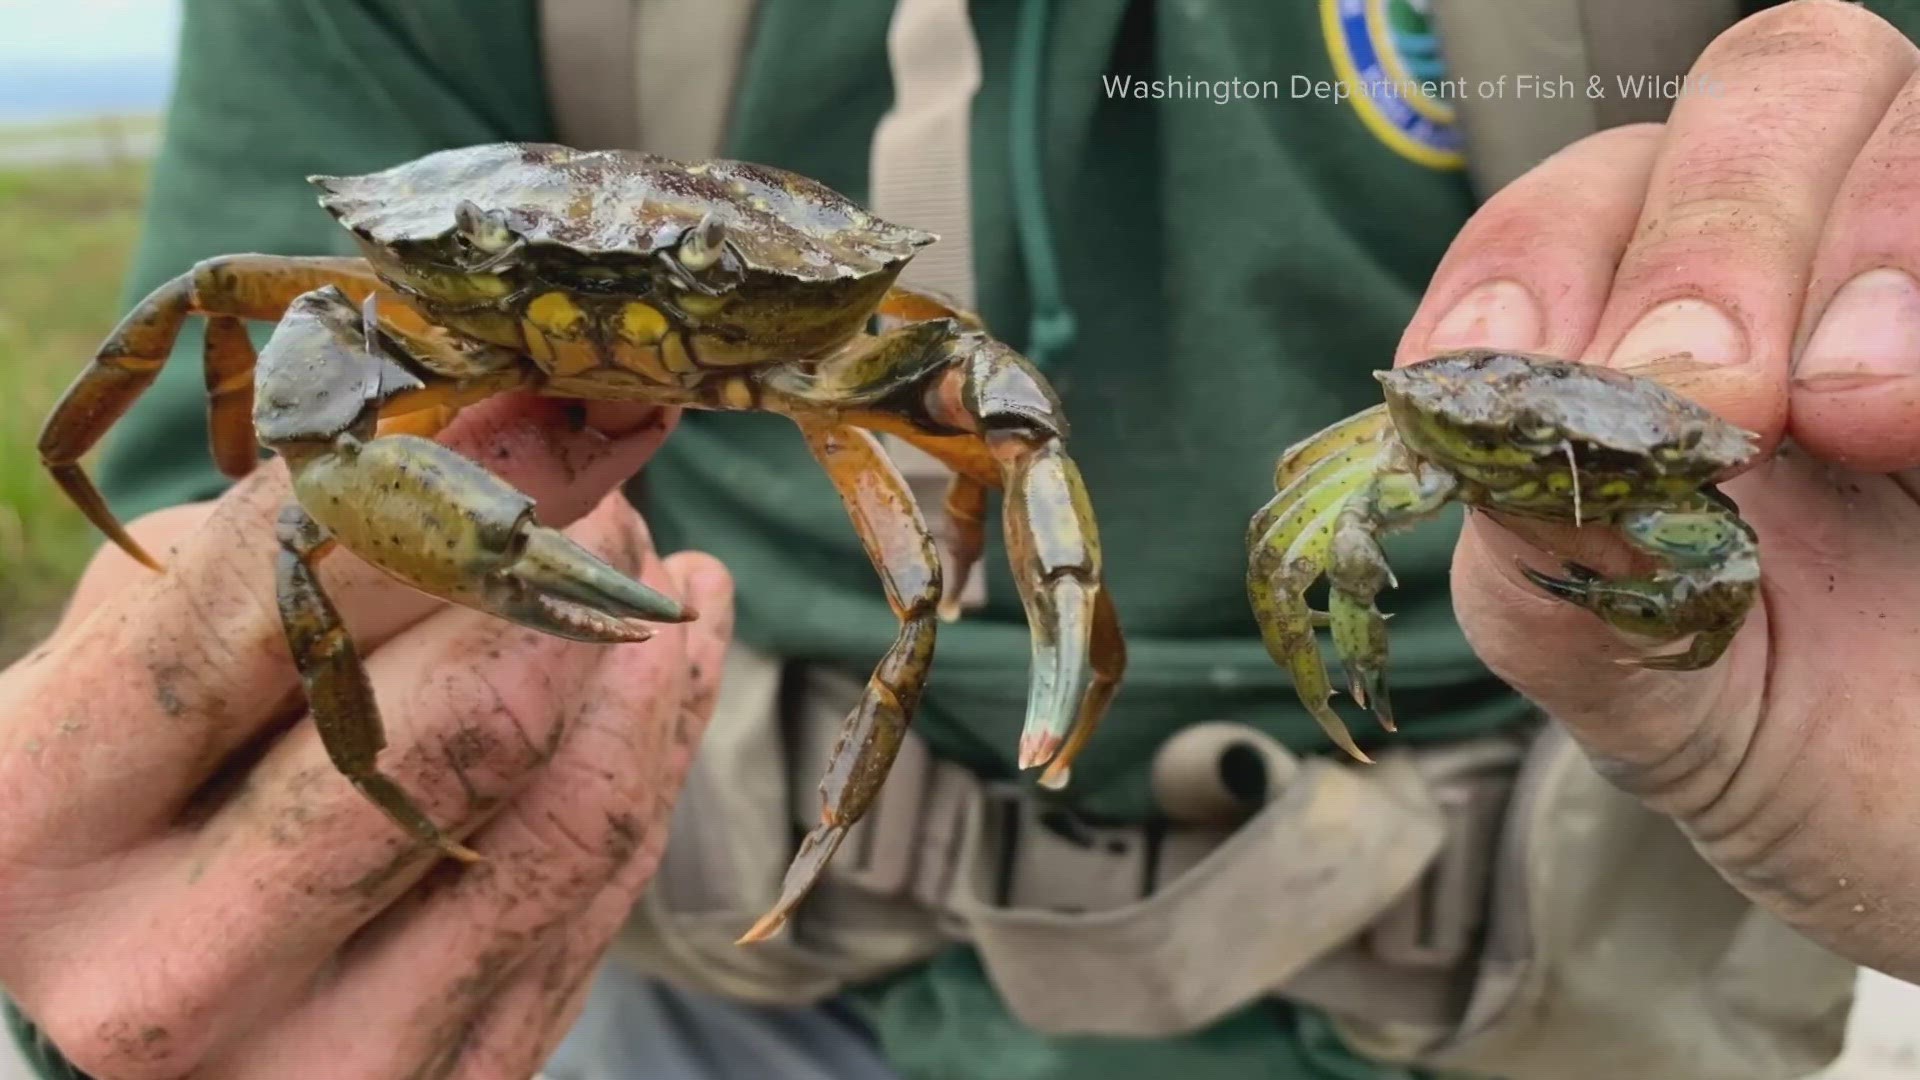 Field workers say European green crabs threaten shellfish populations and can hurt salmon and orca recovery efforts.